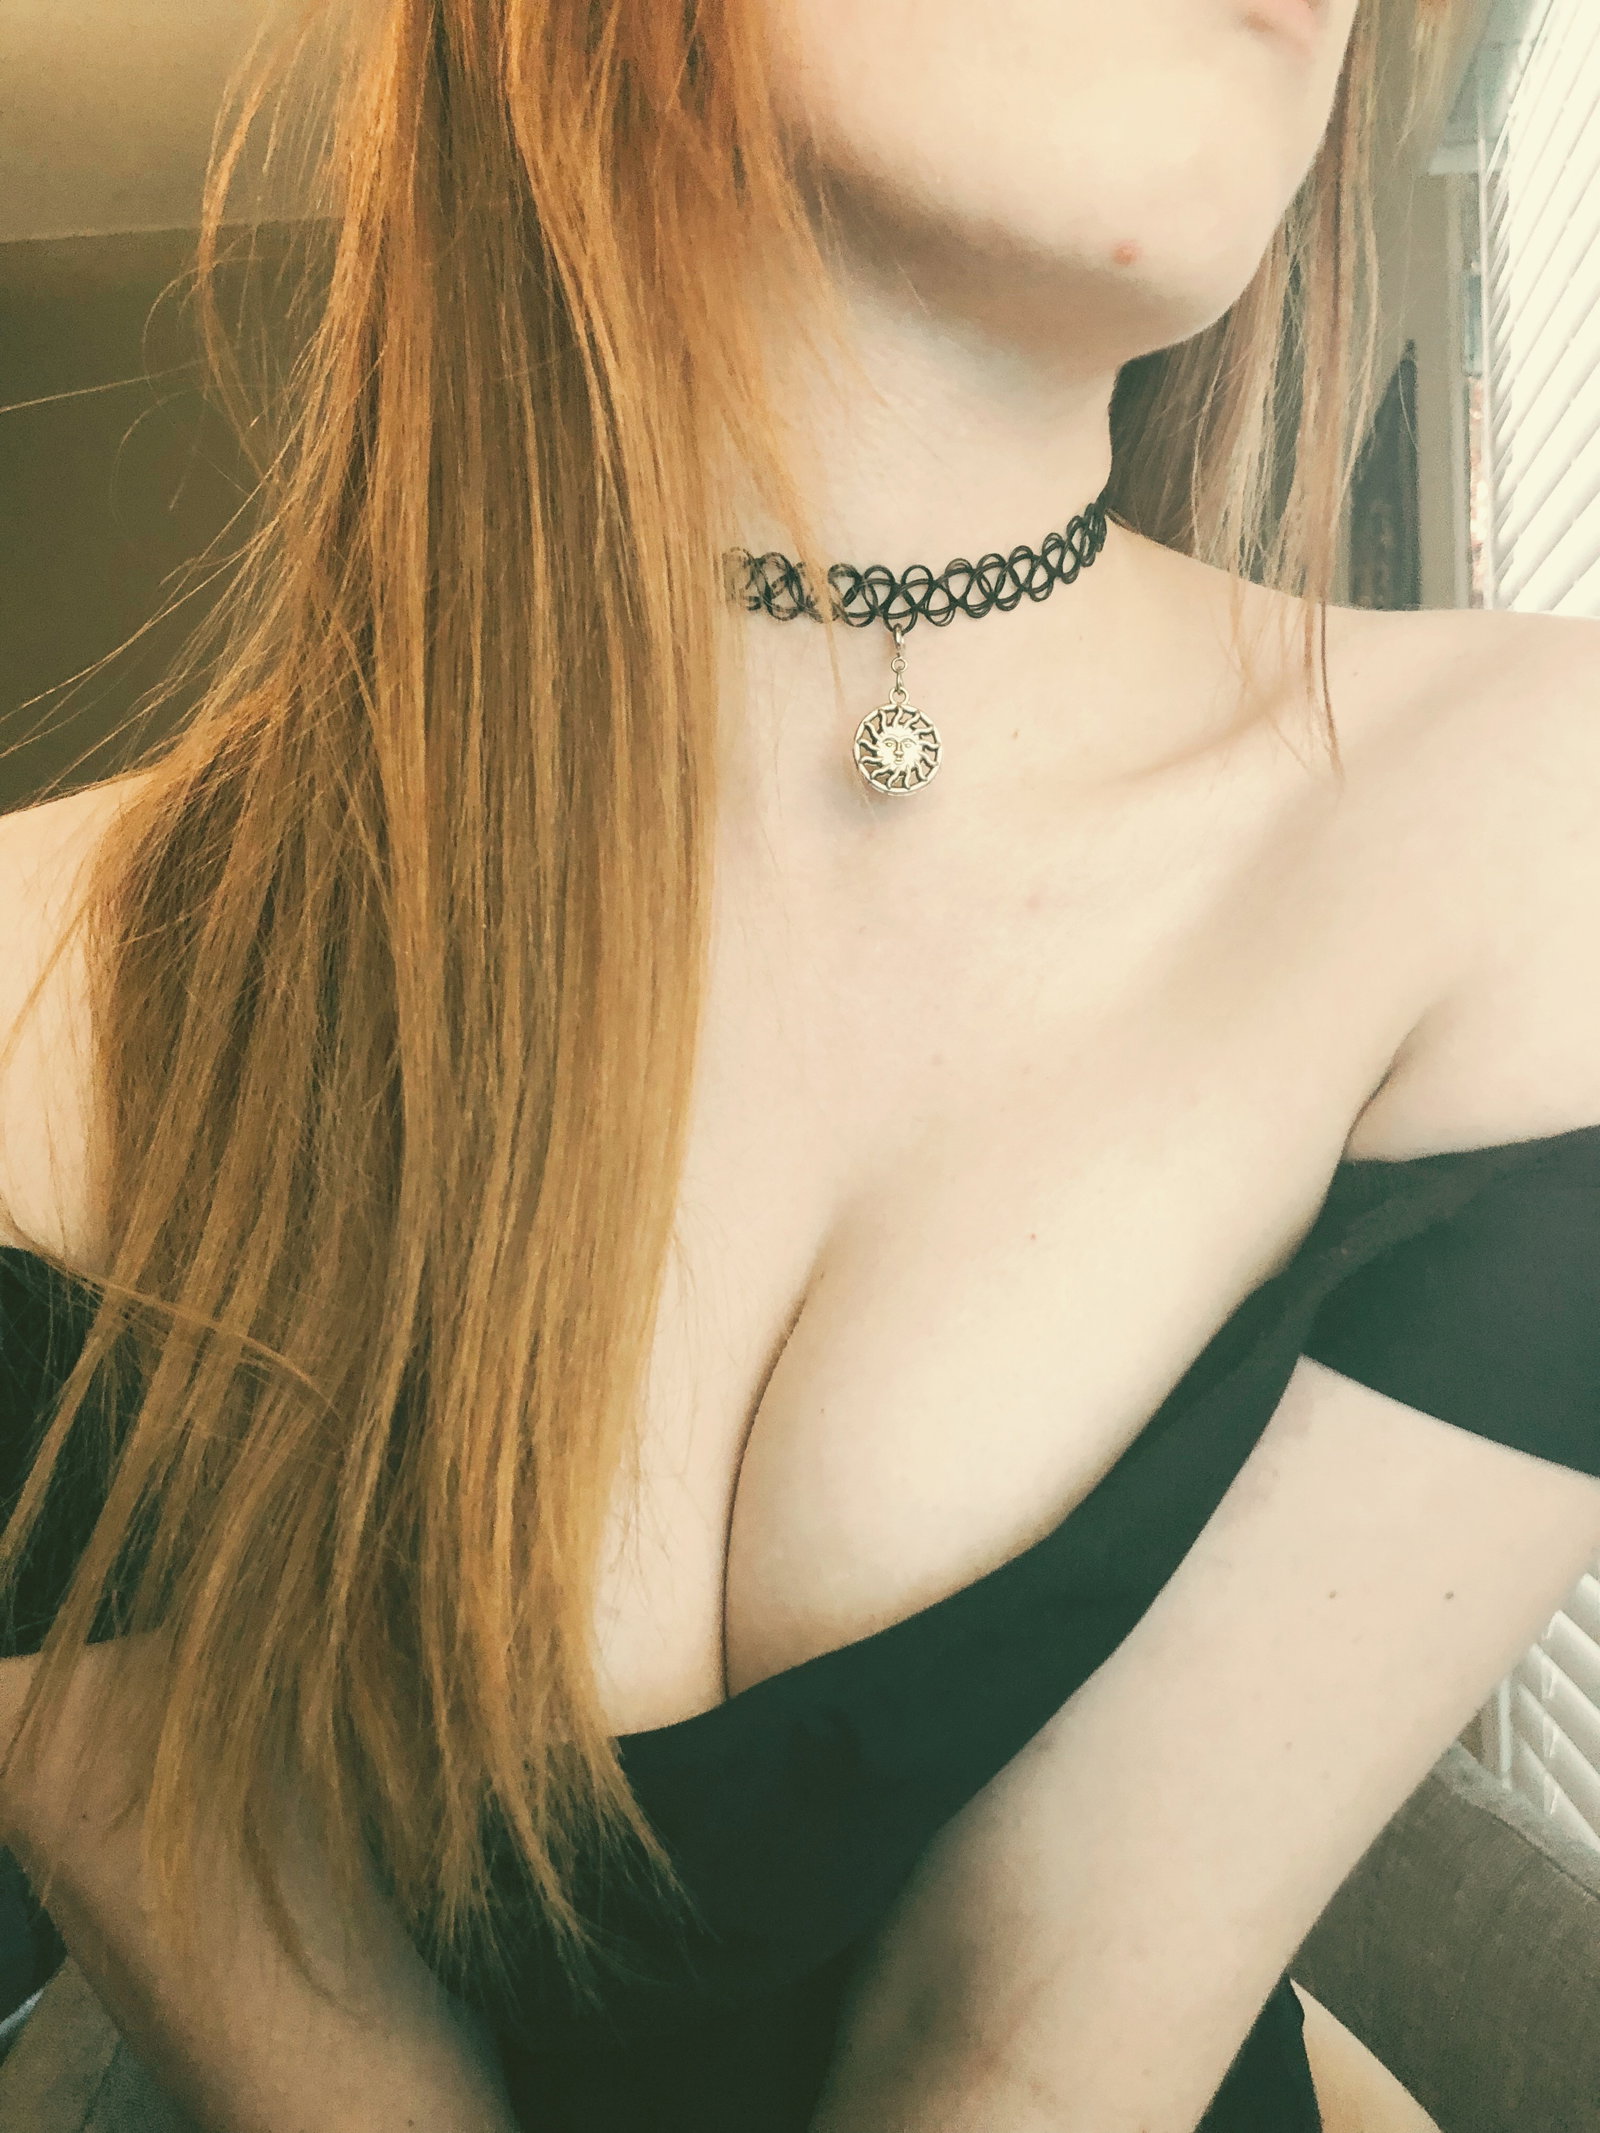 Watch the Photo by JennyFae with the username @JennyFae, posted on December 30, 2018 and the text says 'Hit me up on sextpanther
Https://Sextpanther.com/Jenny-fae'